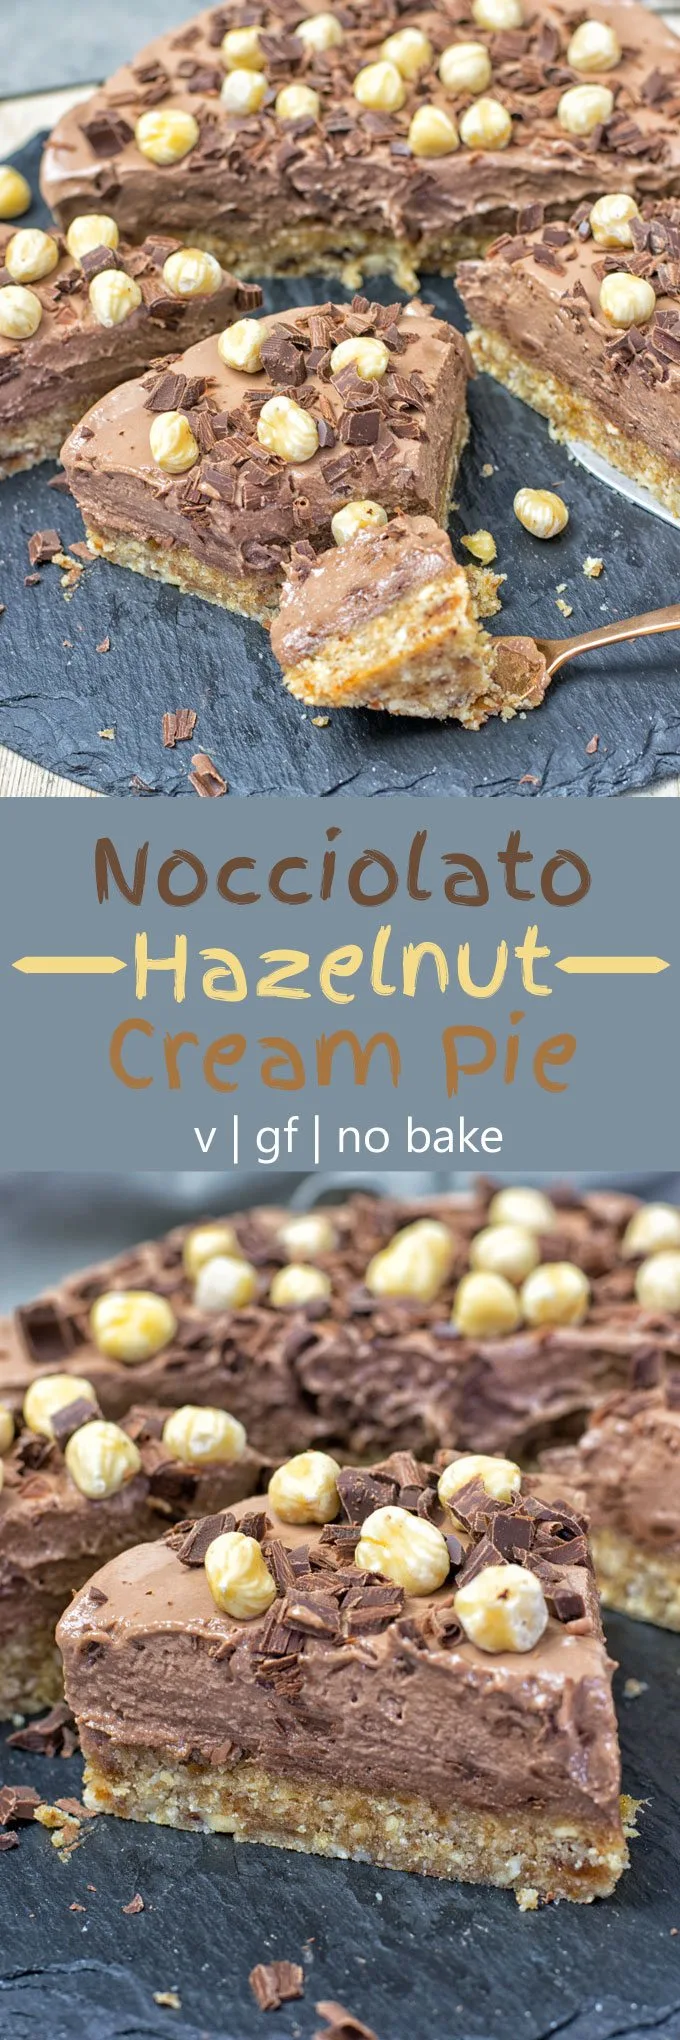 Collage of two pictures of the Nocciolato Hazelnut Cream Pie with recipe title text.